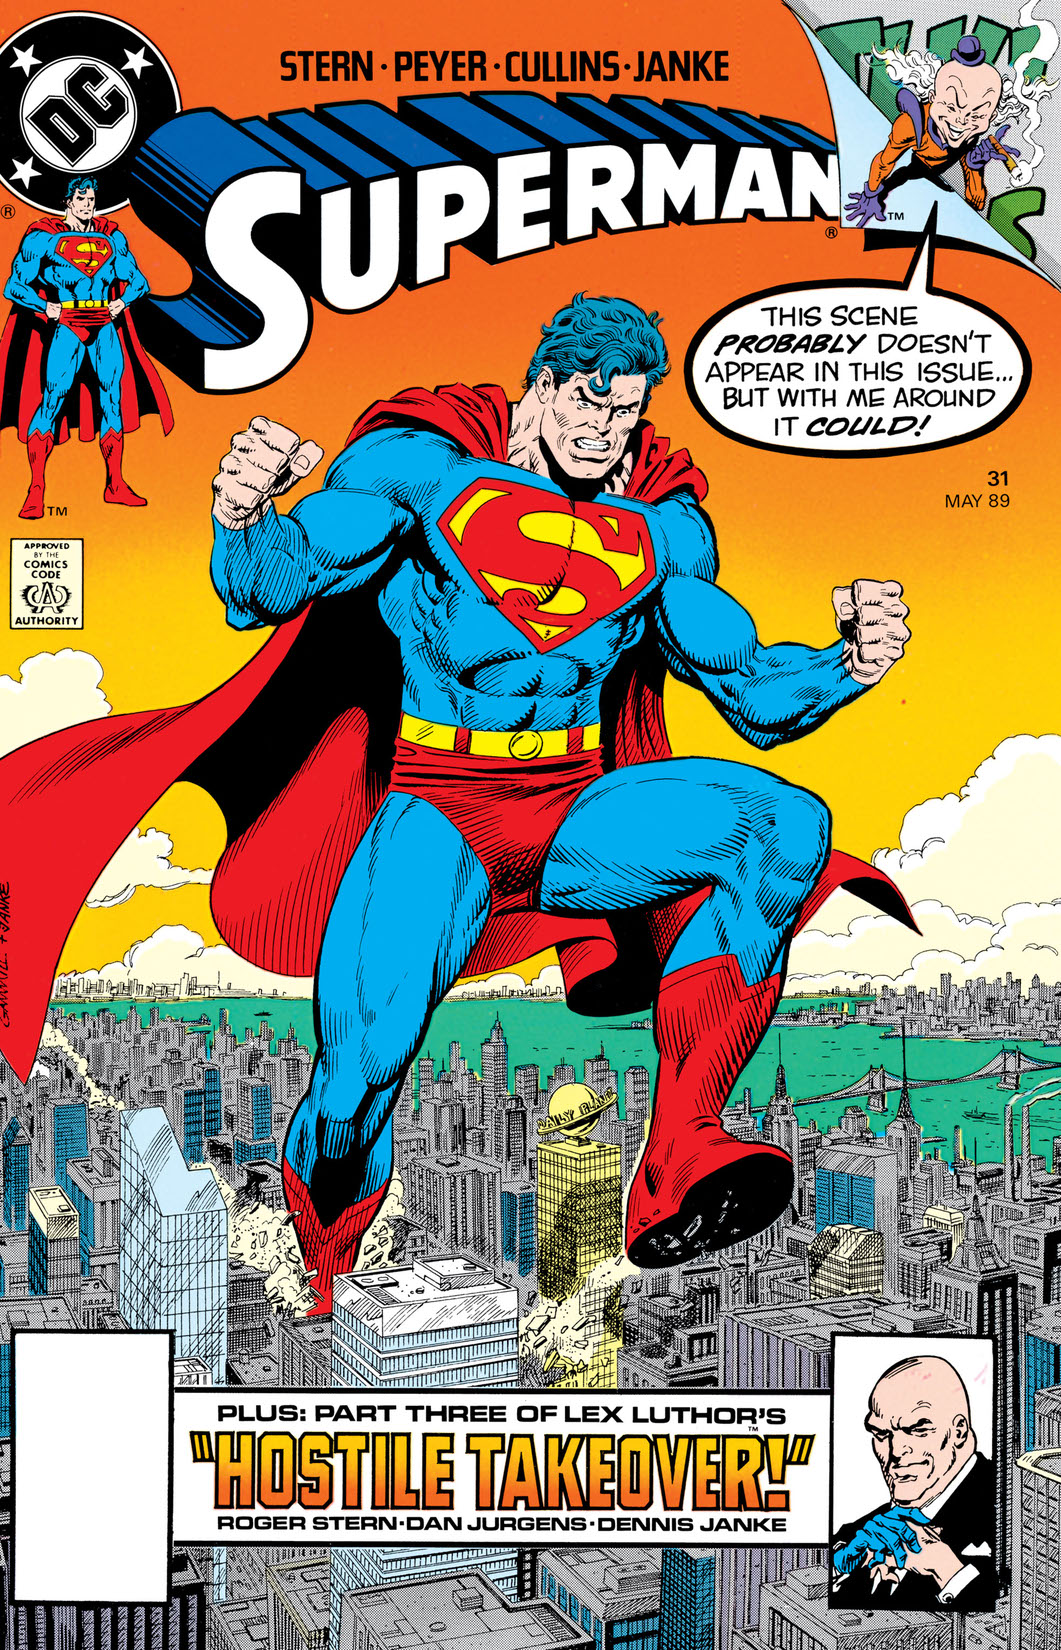 Superman (1986-) #31 preview images